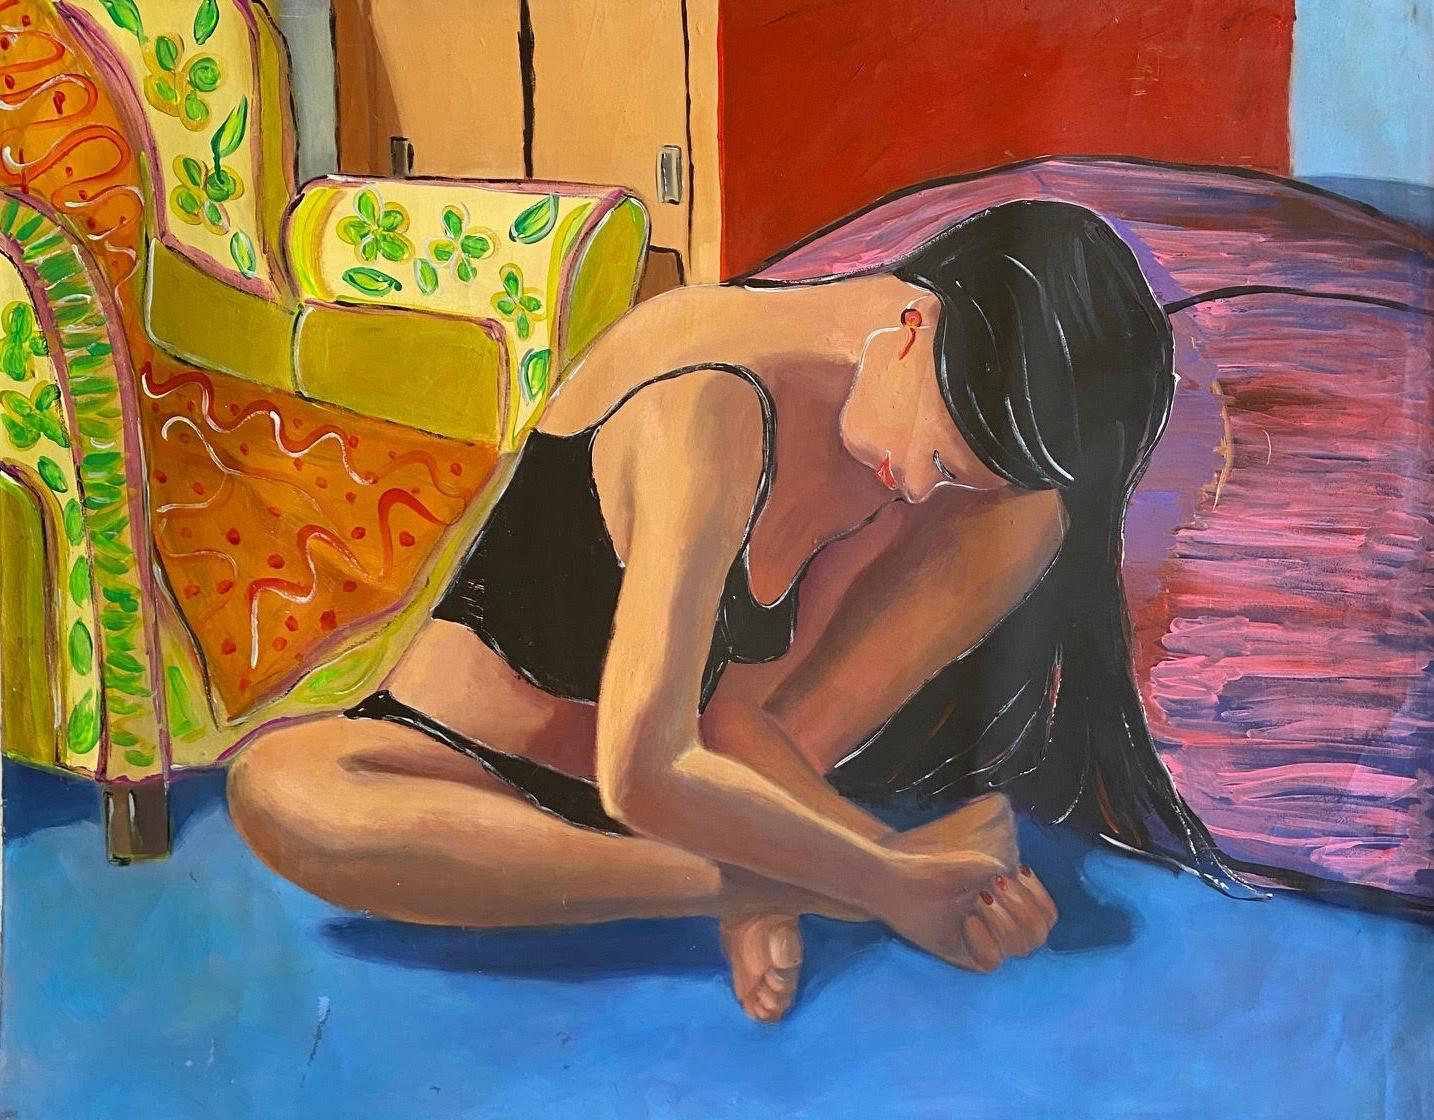 Frida Willis Portrait Painting - ‘A Young Woman In Yoga Class’ Figurative Art Oil On Canvas by Frida